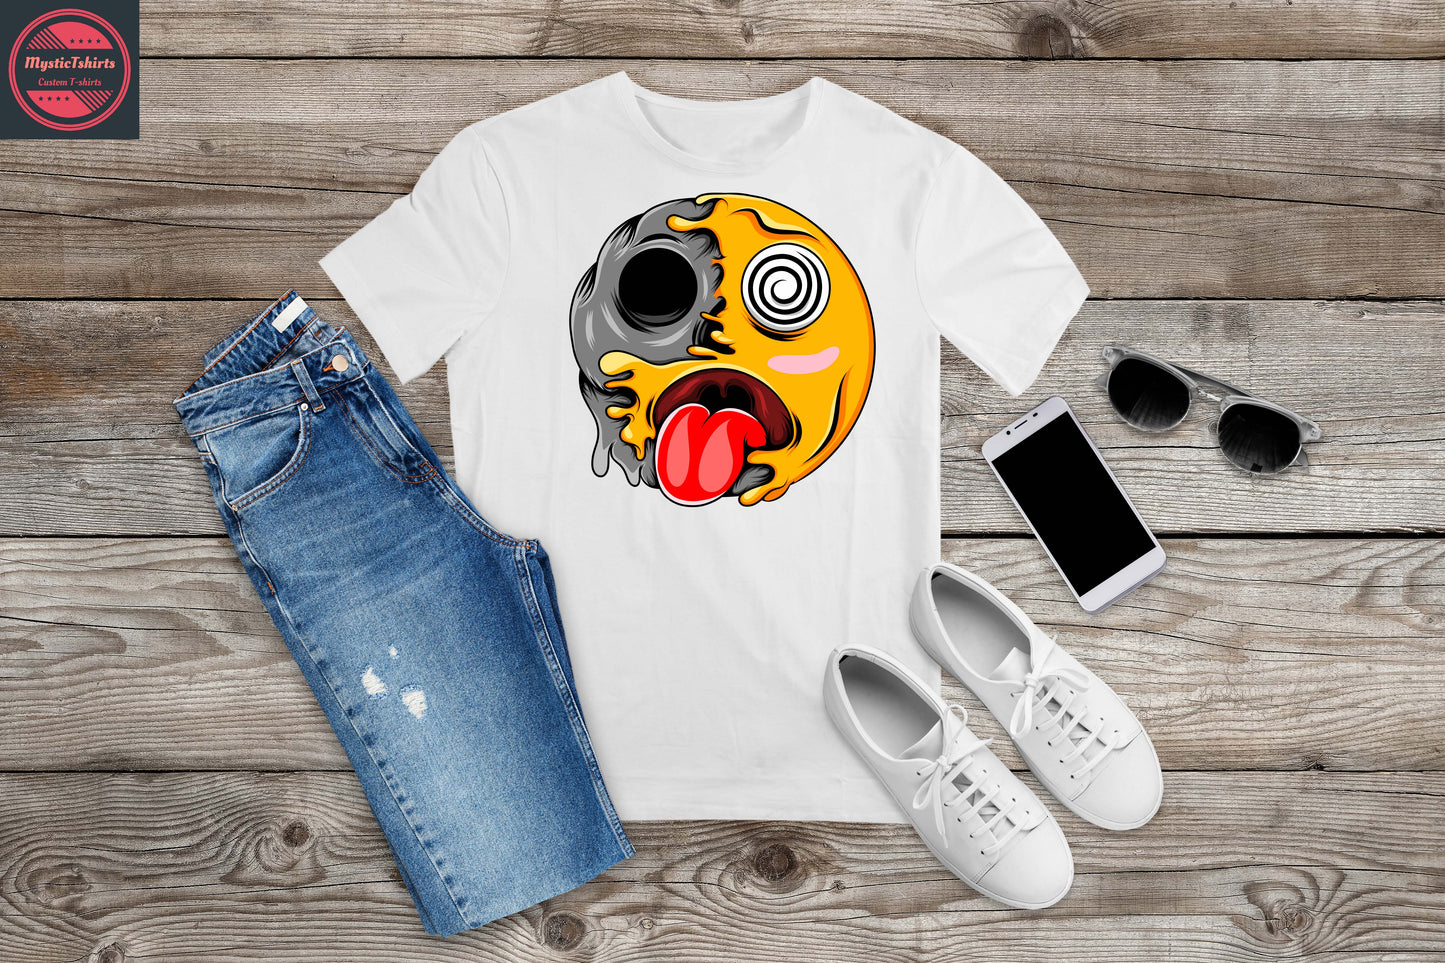 105. CRAZY FACE, Personalized T-Shirt, Custom Text, Make Your Own Shirt, Custom Tee